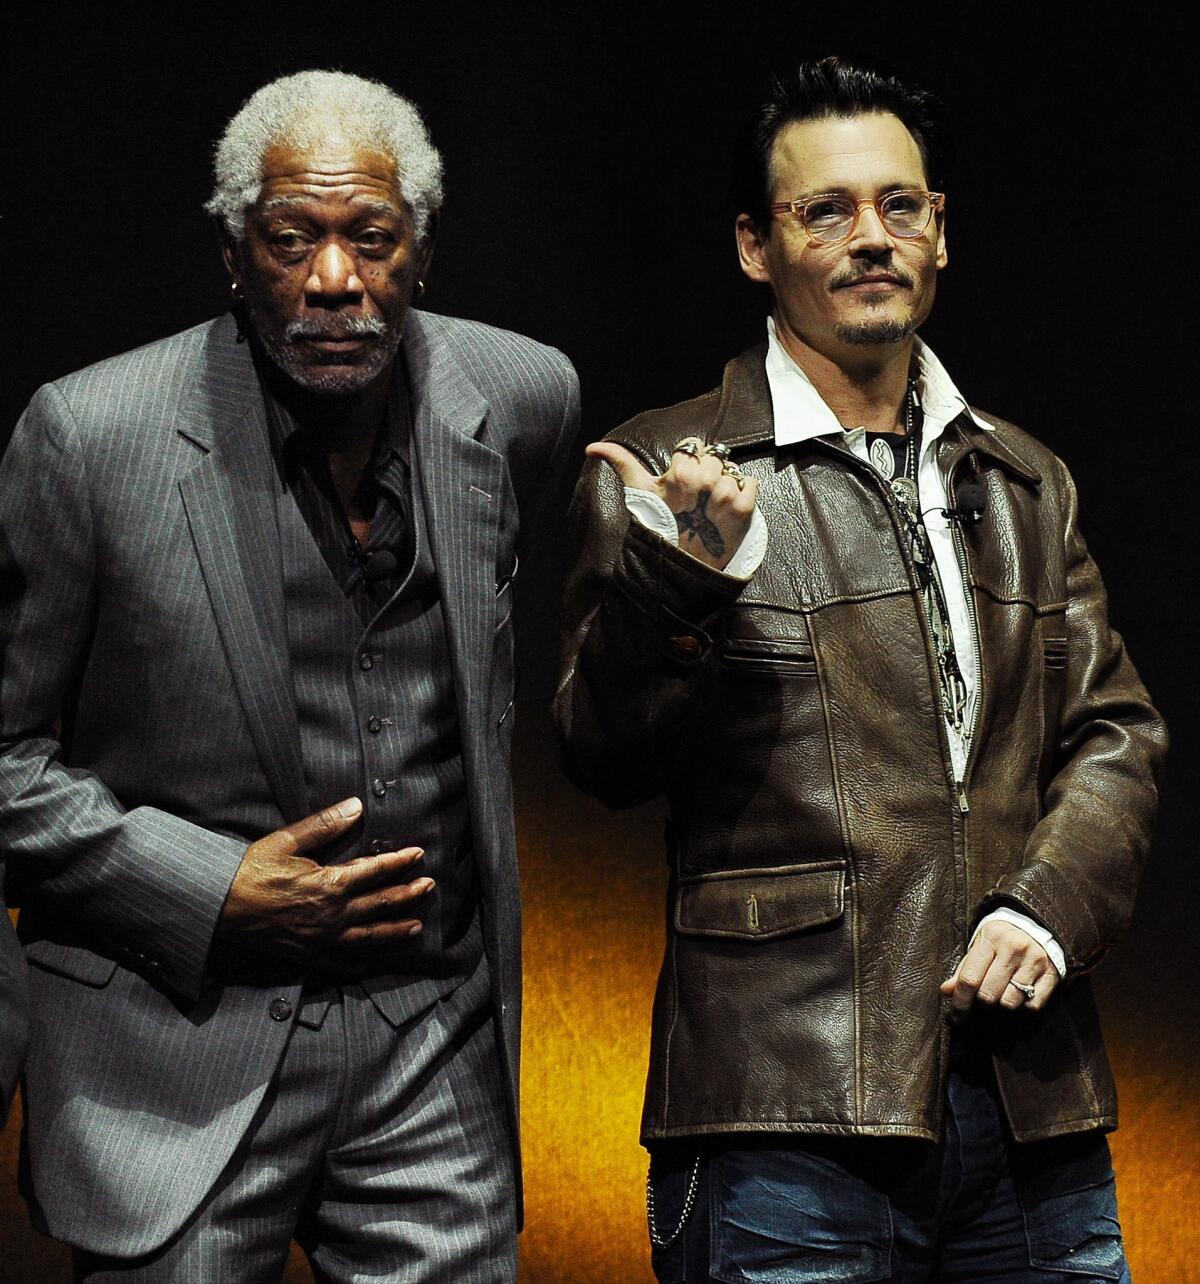 Johnny Depp, right, confirmed engagement rumors in his own roundabout way during a promotional appearance for his upcoming film "Transcendence" in Beijing on Monday. In this photo, Depp, wearing said ring, appears with his Transcendence" costar Morgan Freeman during the Warner Bros. presentation at CinemaCon 2014 in Las Vegas.